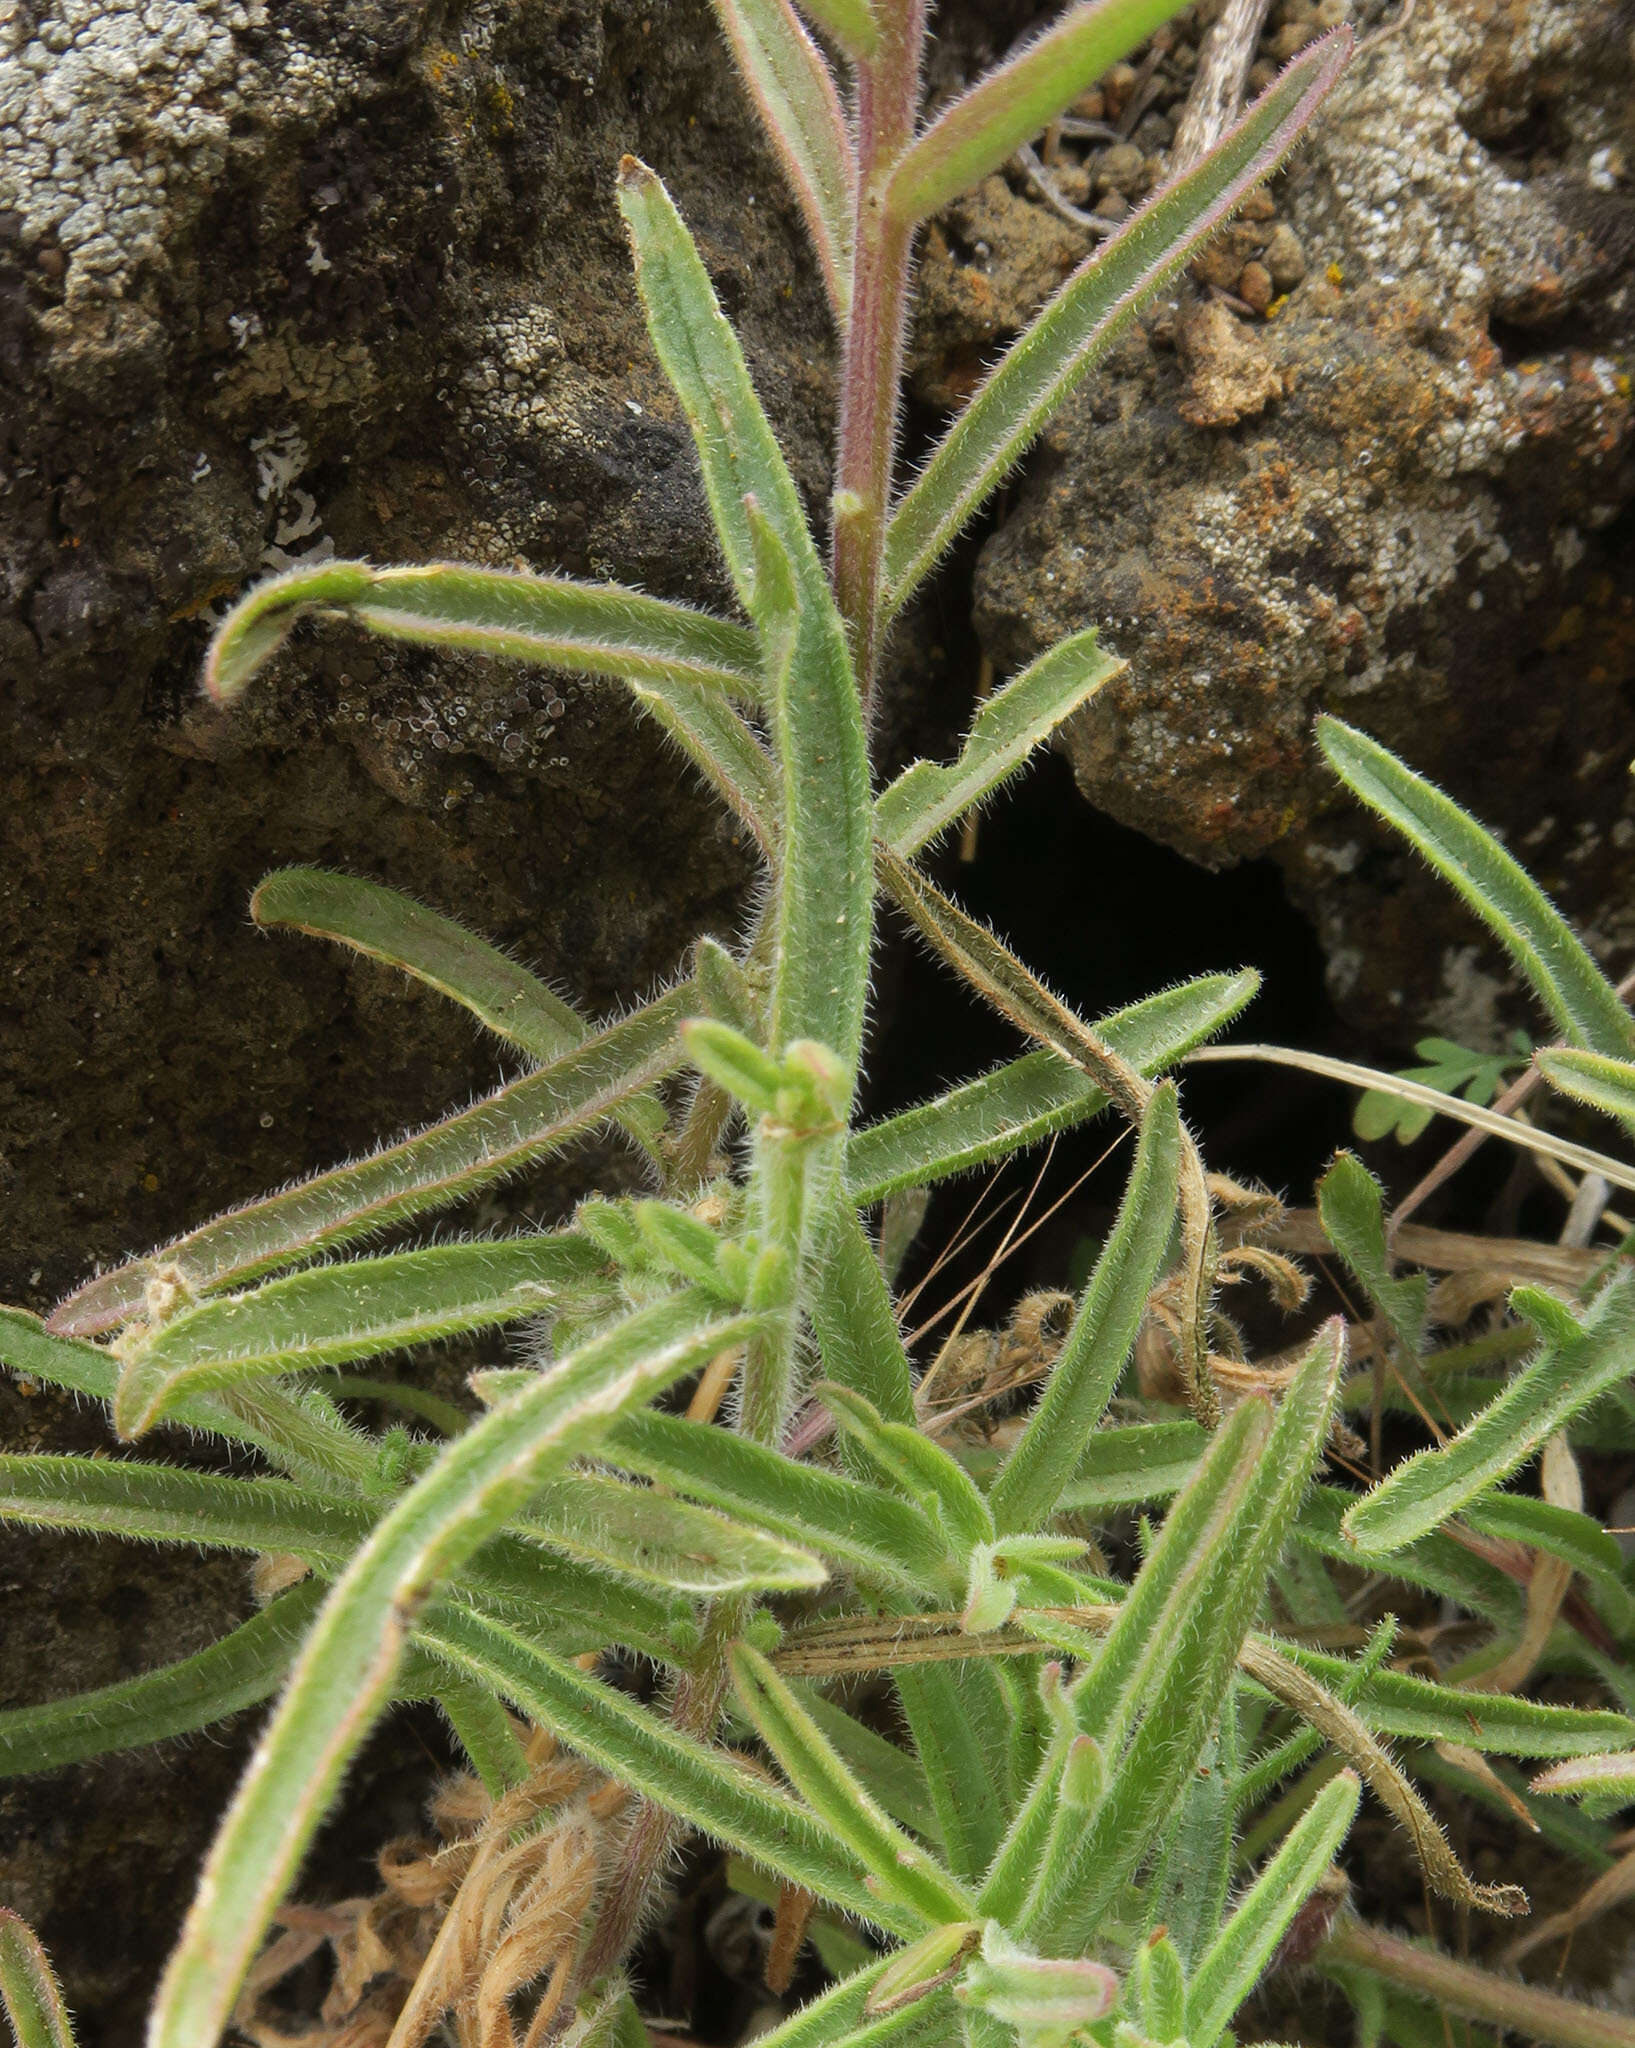 Image of Peck's Indian paintbrush